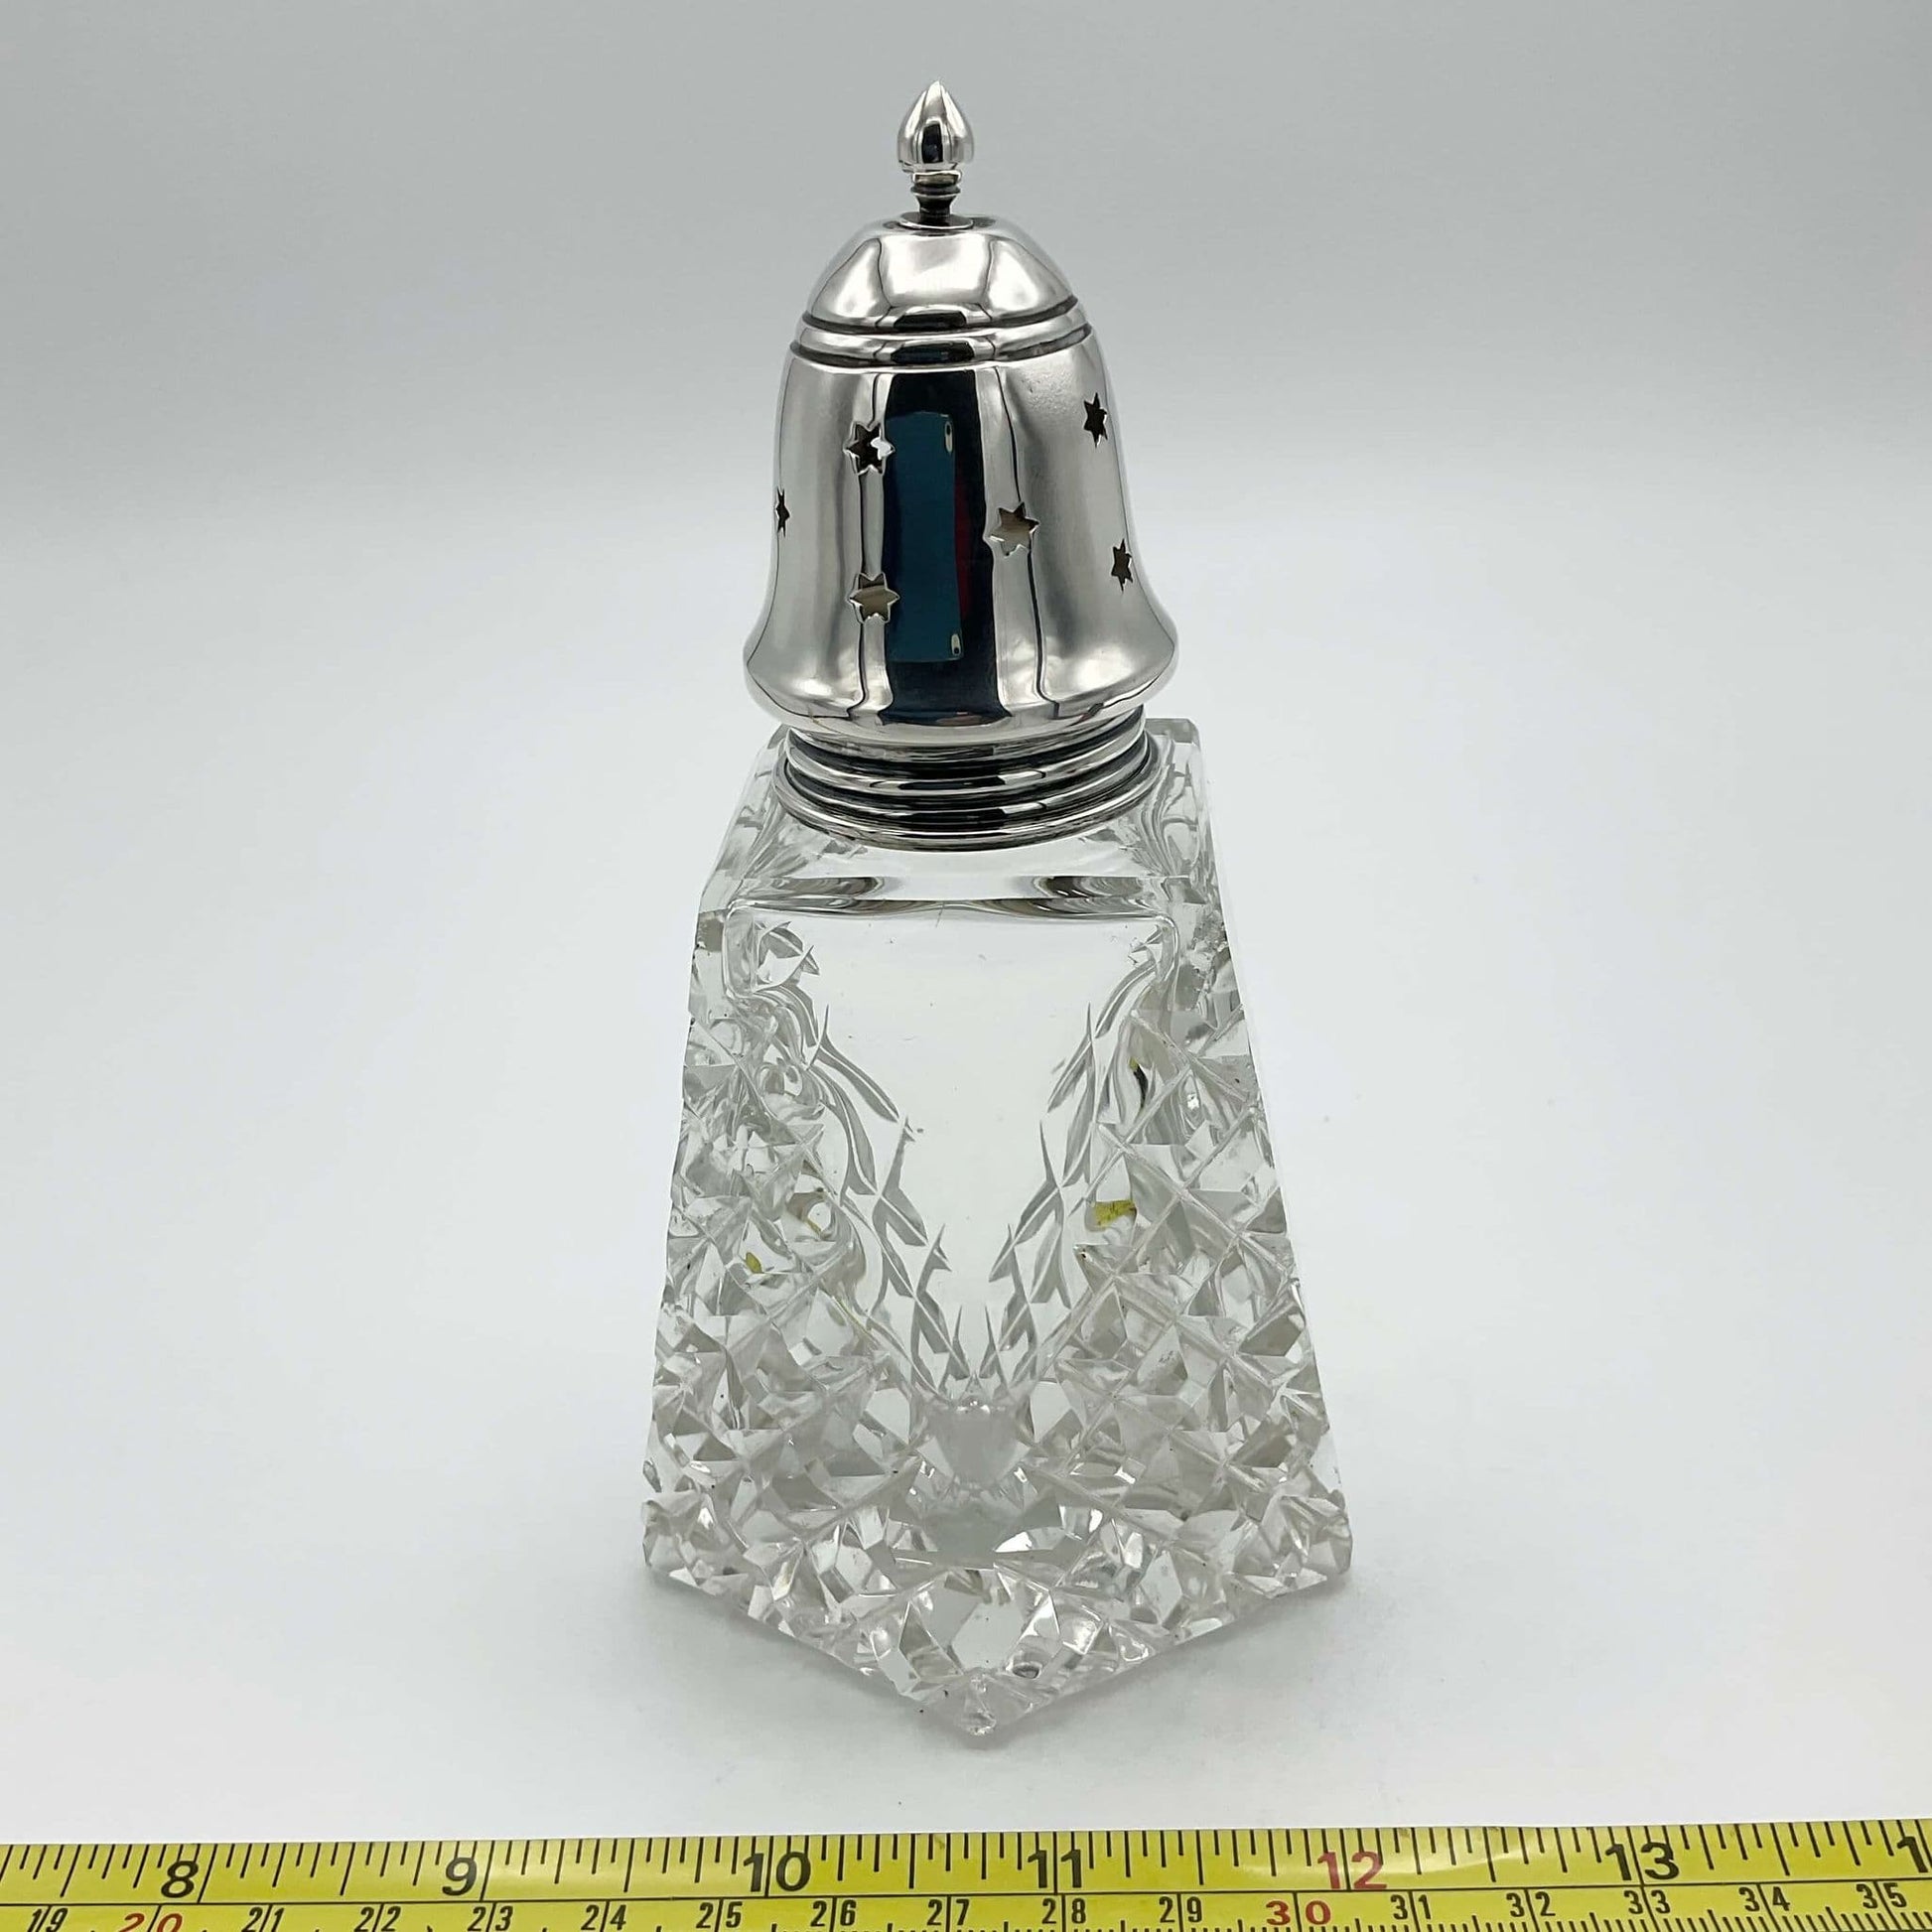 Silver topped glass caster next to a tape measure showing it's width as 7cm